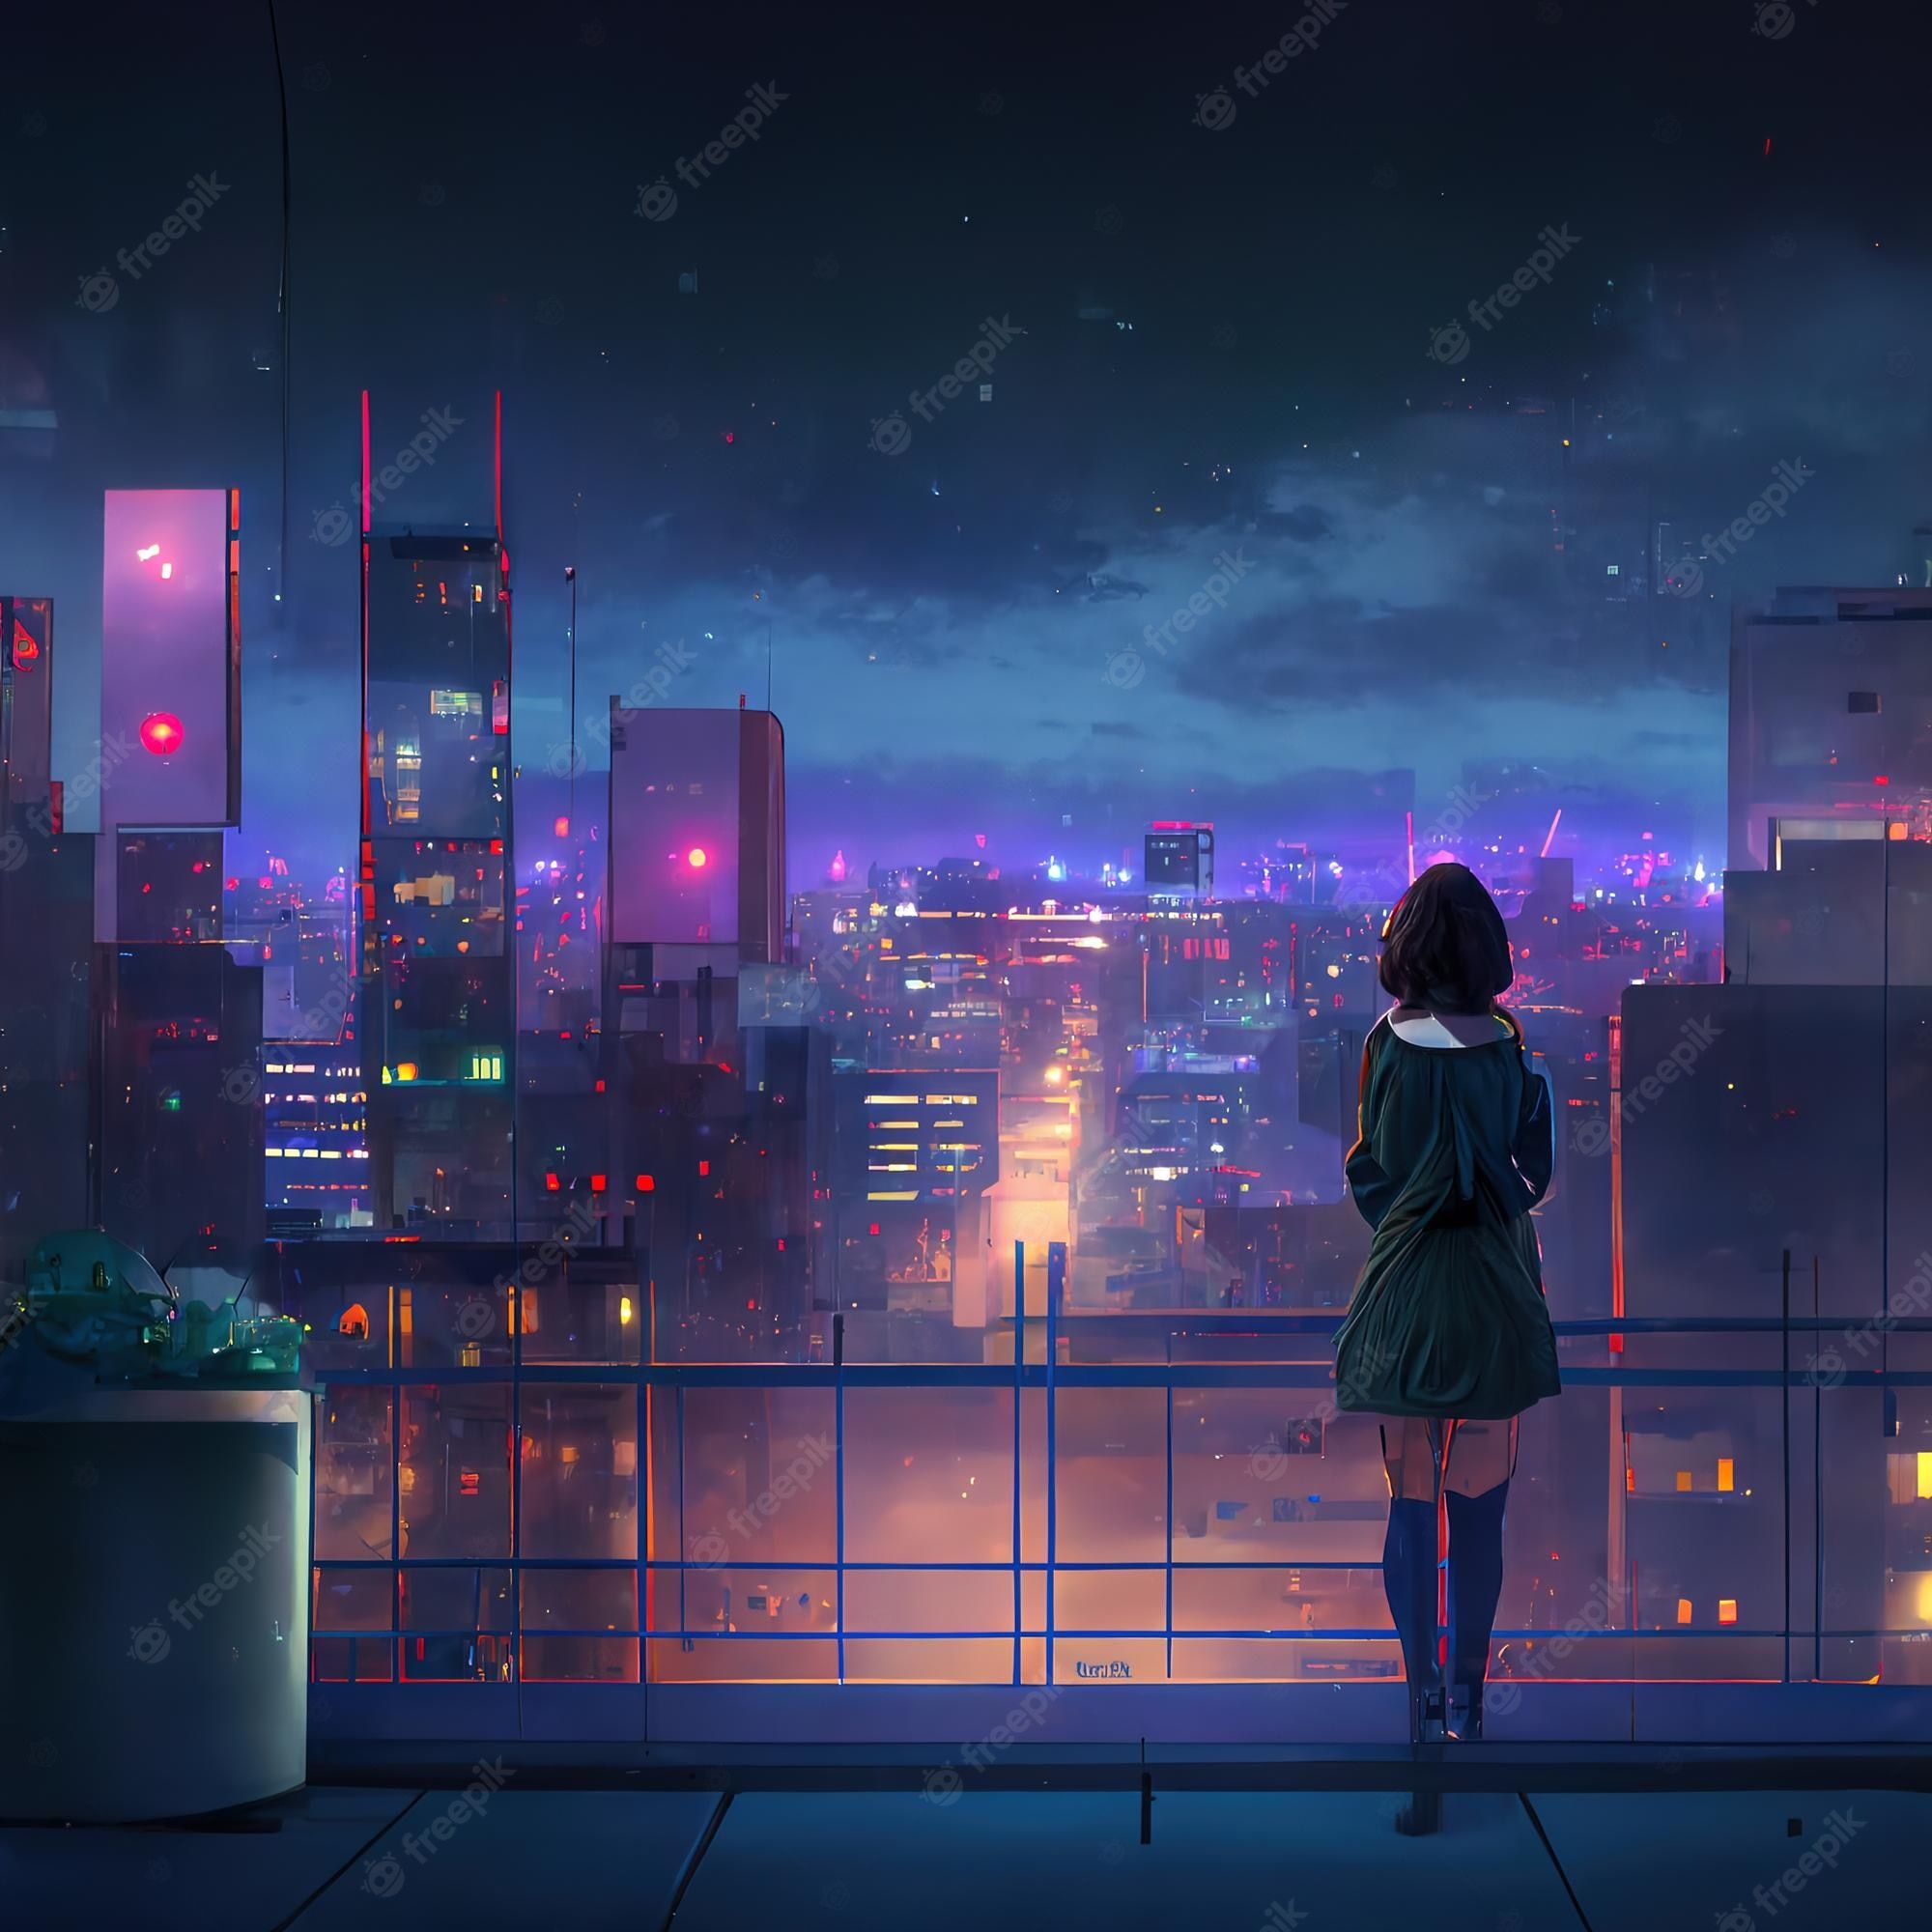 Digital illustration of a girl standing on a balcony looking out over a city at night - Lo fi